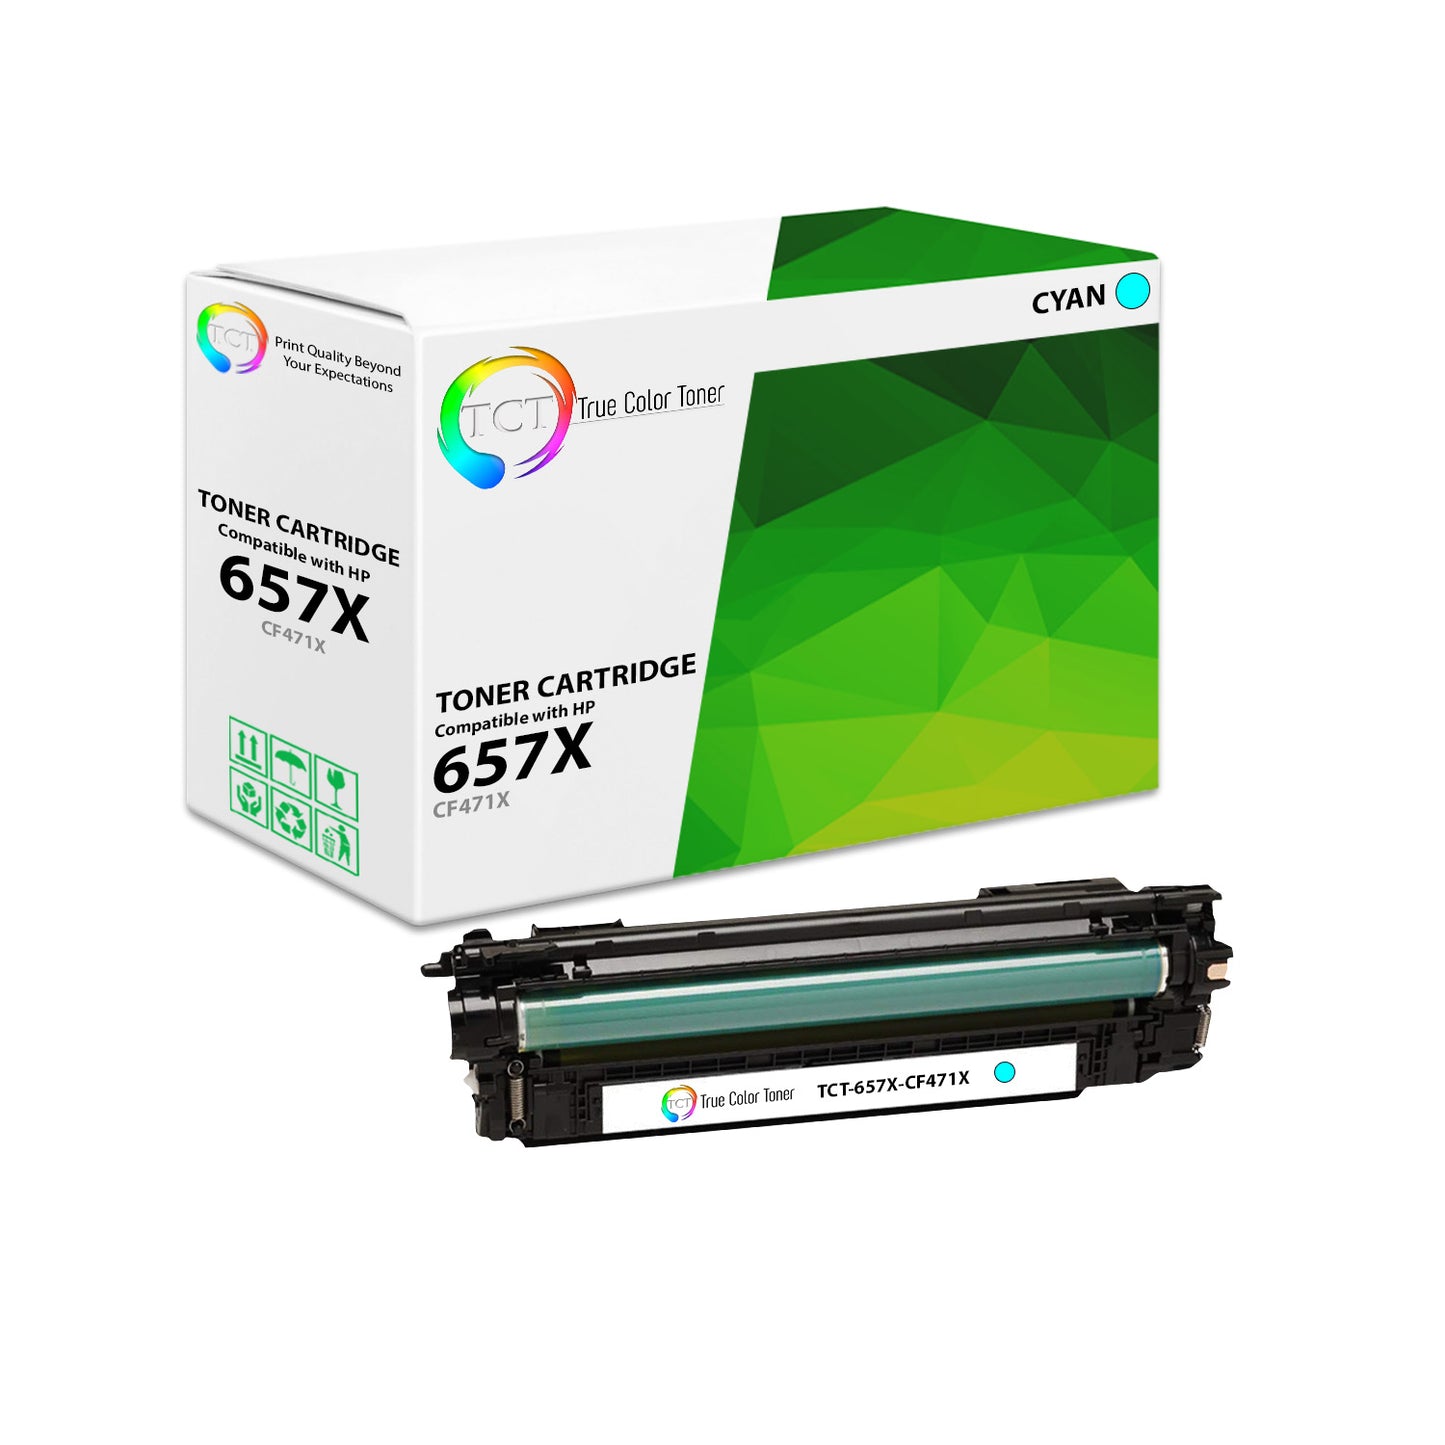 TCT Compatible High Yield Toner Cartridge Replacement for the HP 657X Series - 1 Pack Cyan